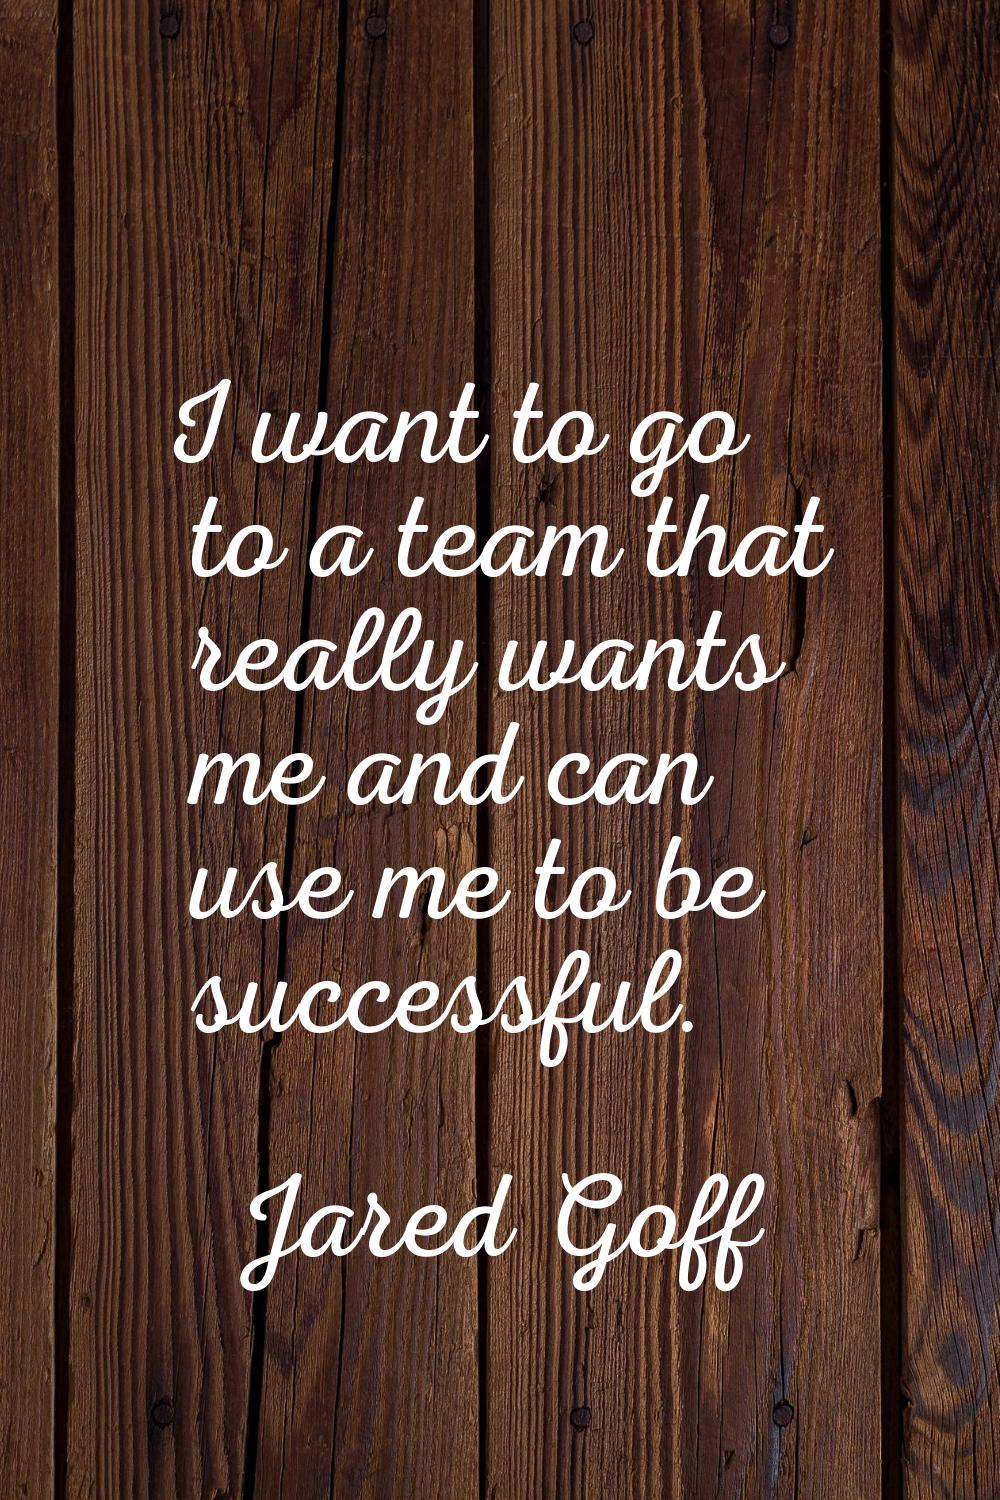 I want to go to a team that really wants me and can use me to be successful.